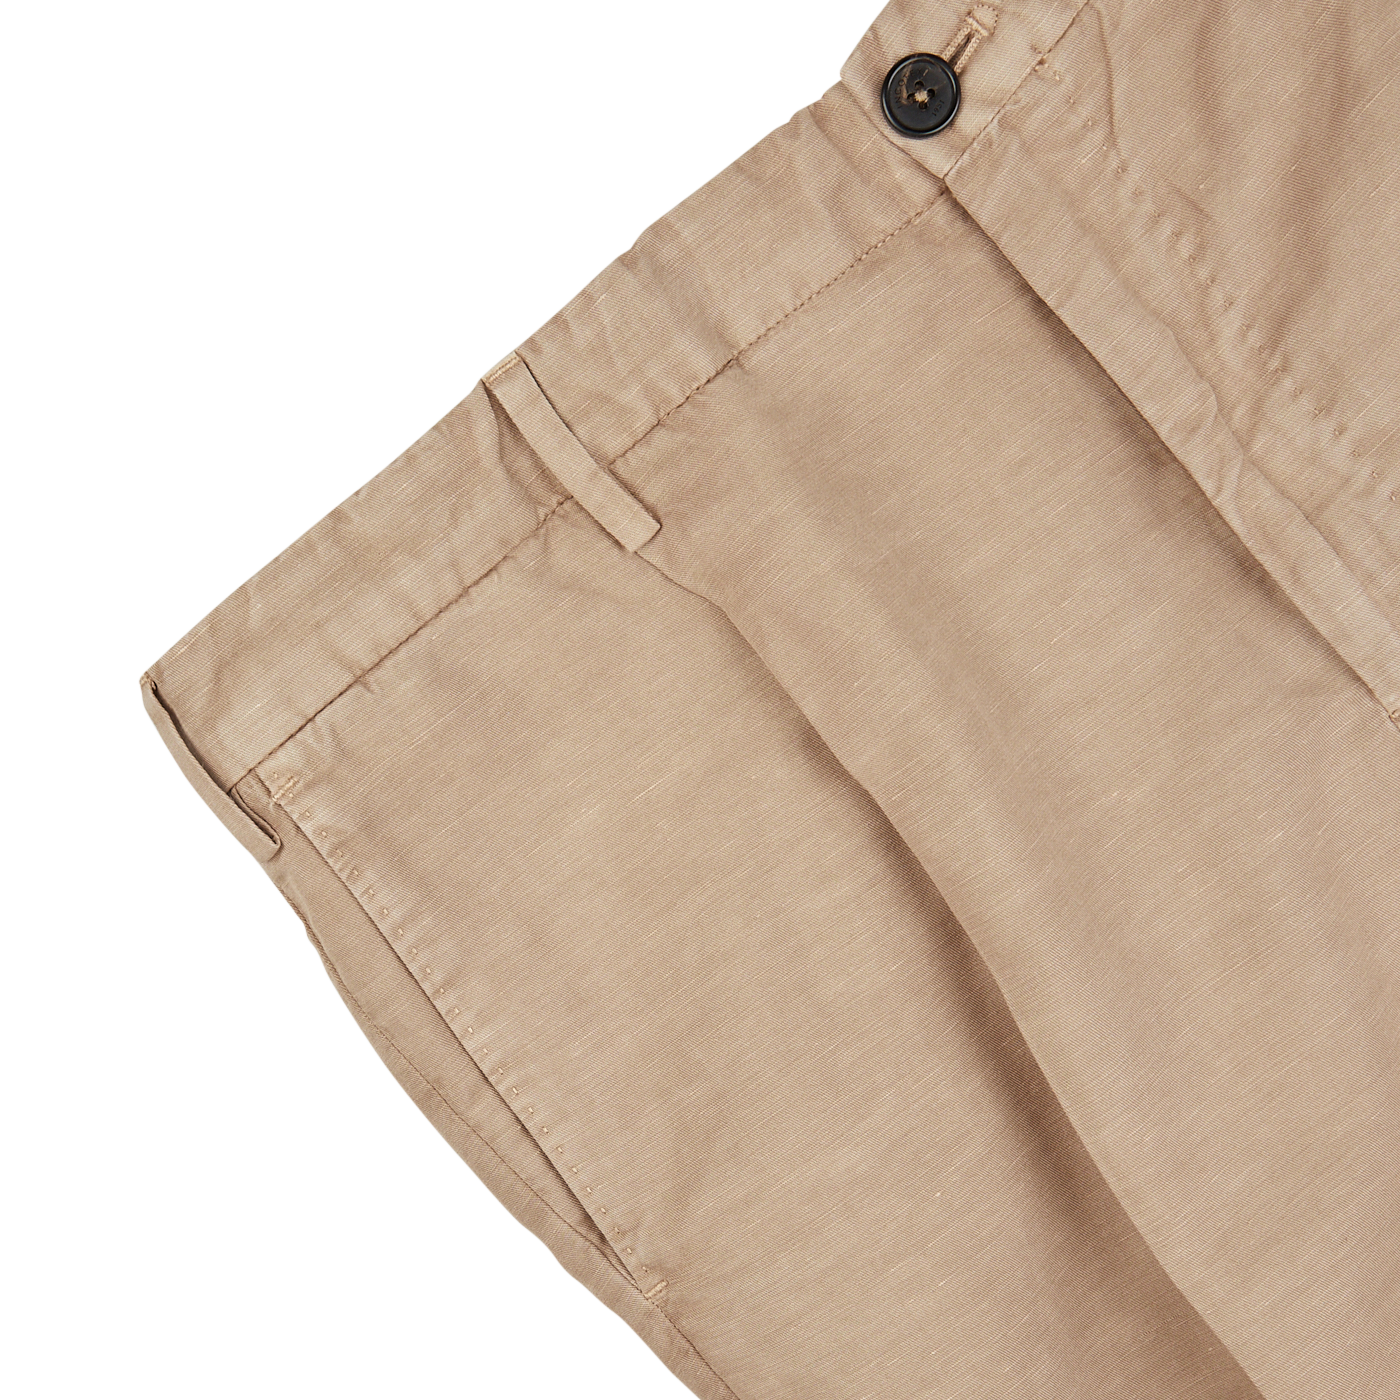 Close-up view of Slowear light beige washed Chinolino suit with a button closure and stitch detailing.